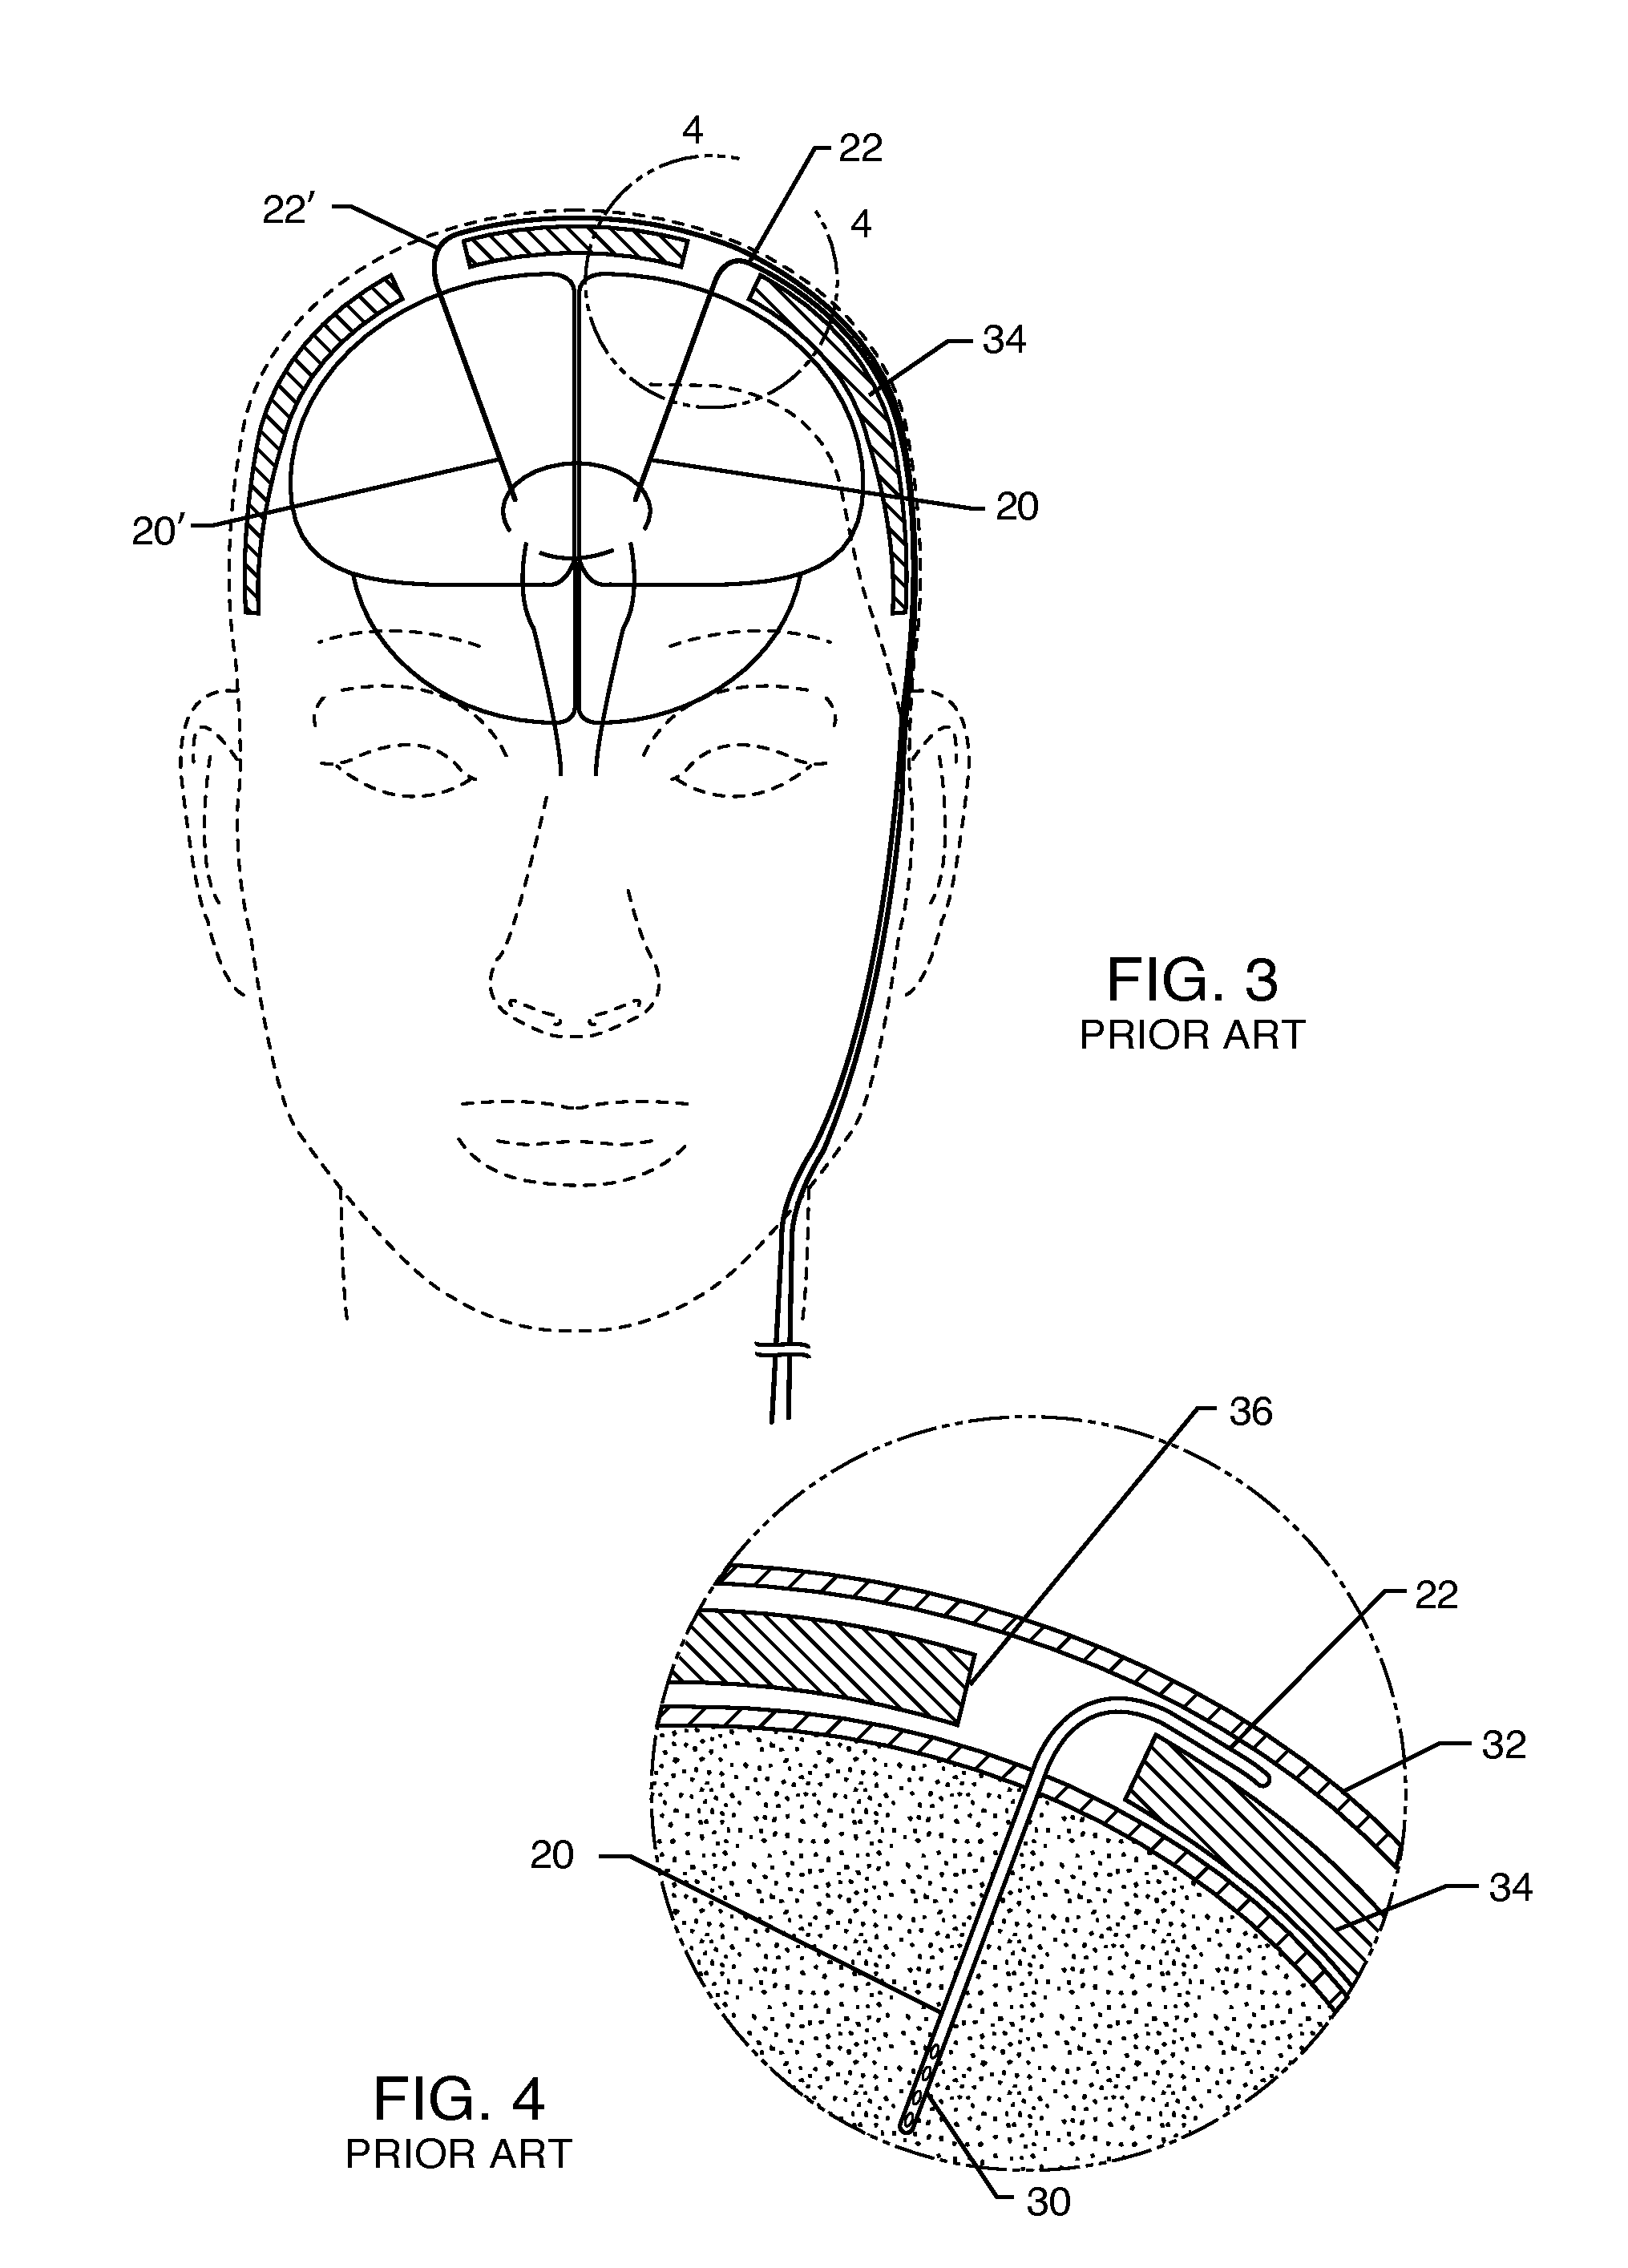 Satellite therapy delivery system for brain neuromodulation